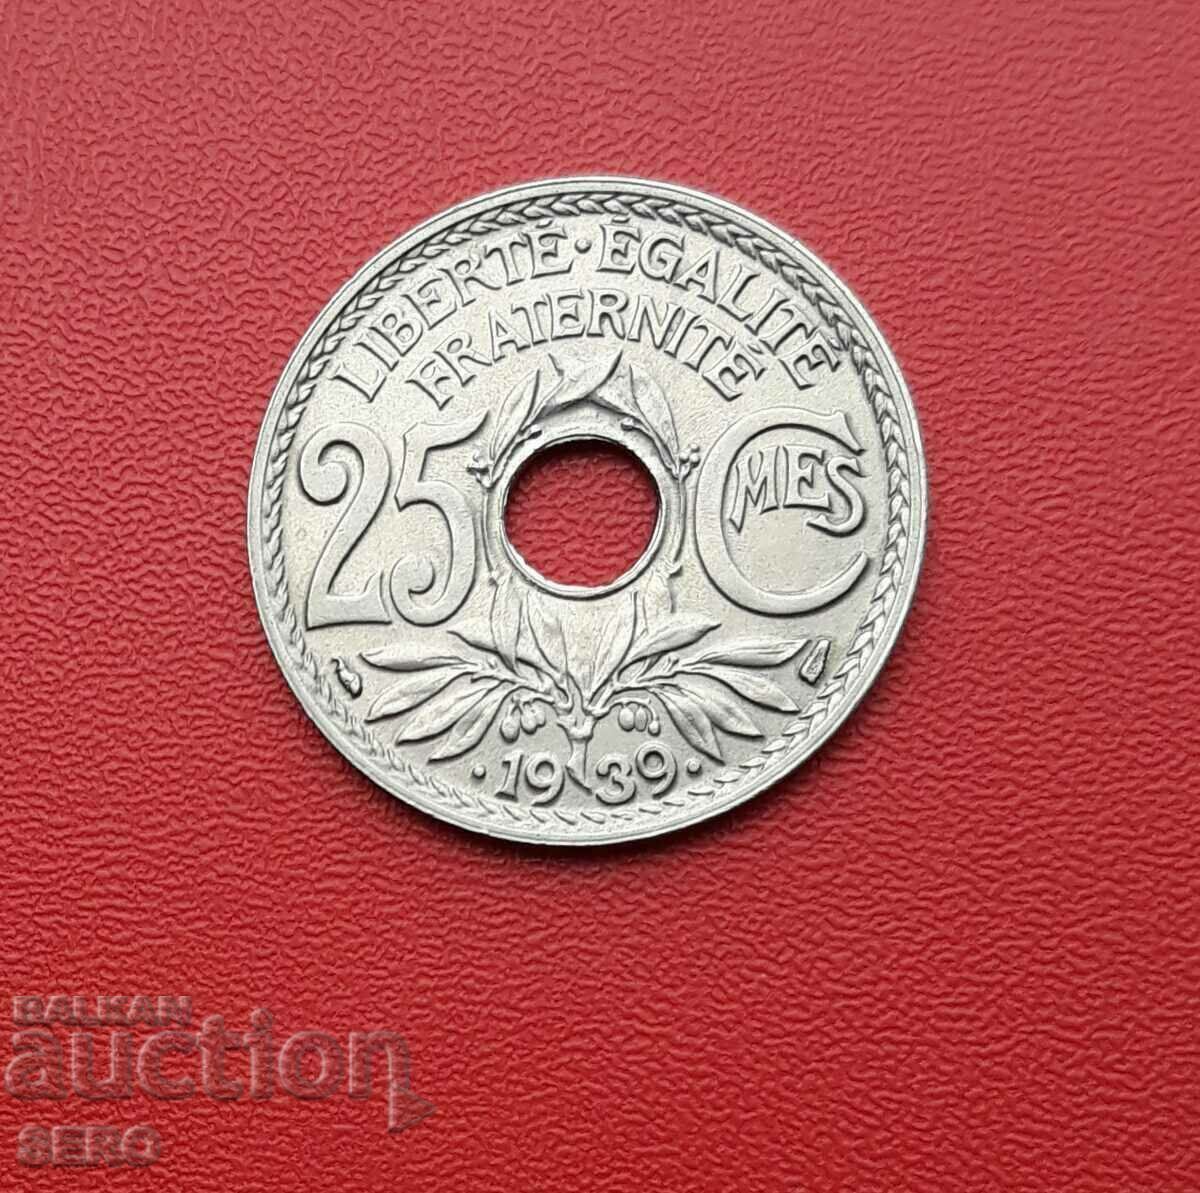 France-25 cents 1939-extra preserved